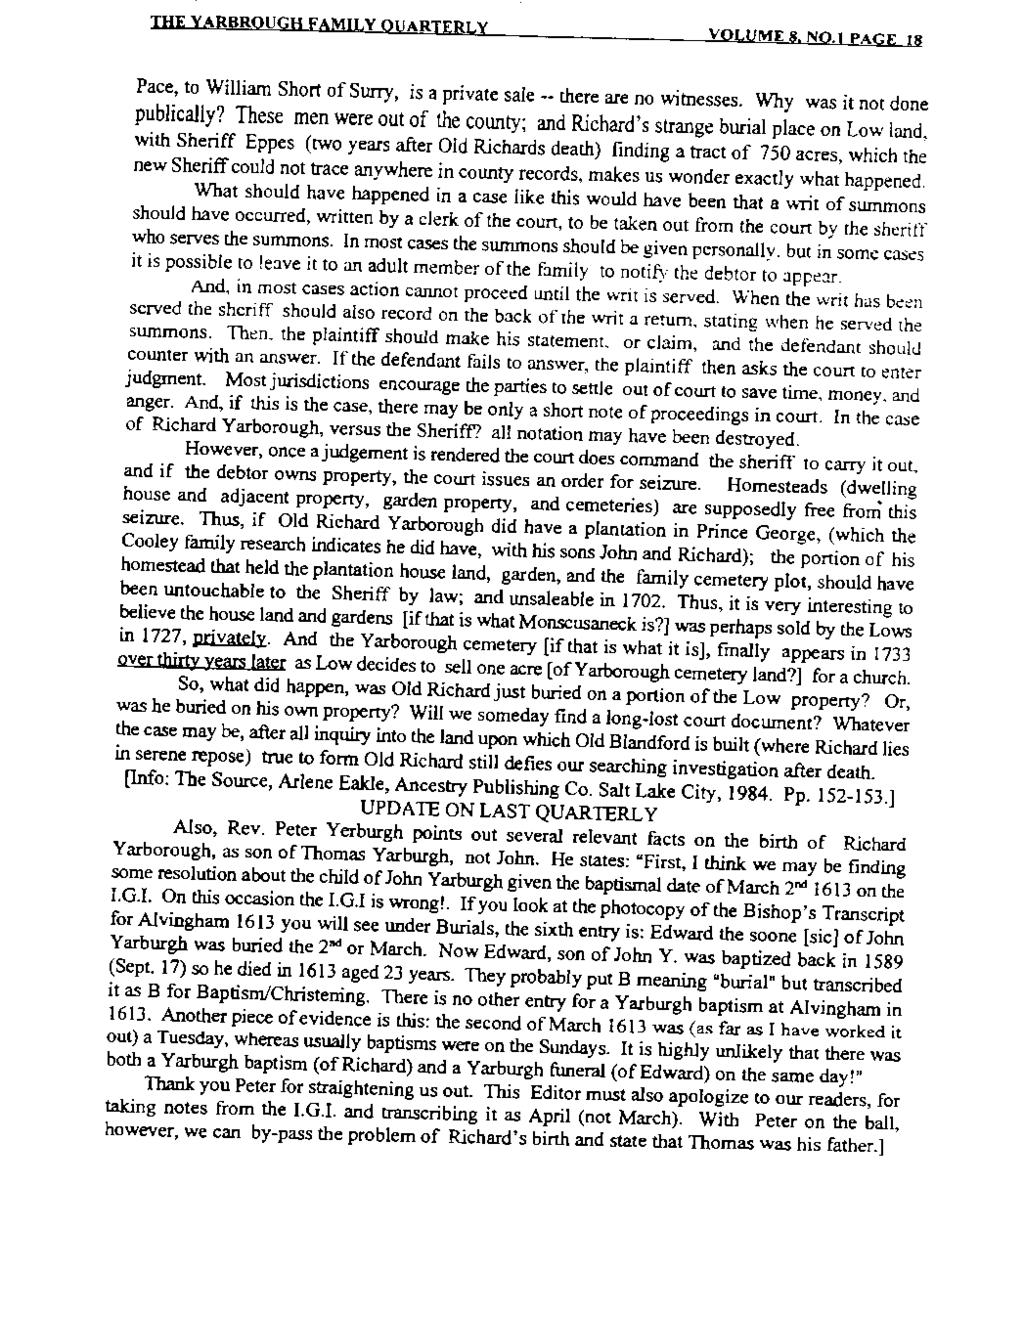 THE YARBROUGH FAMILY QUARTERLY VOLUME 8. N0.1 PAGE 18 Pace, to William Short of Surry, is a private sale-- there are no witnesses. Why was it not done publically?